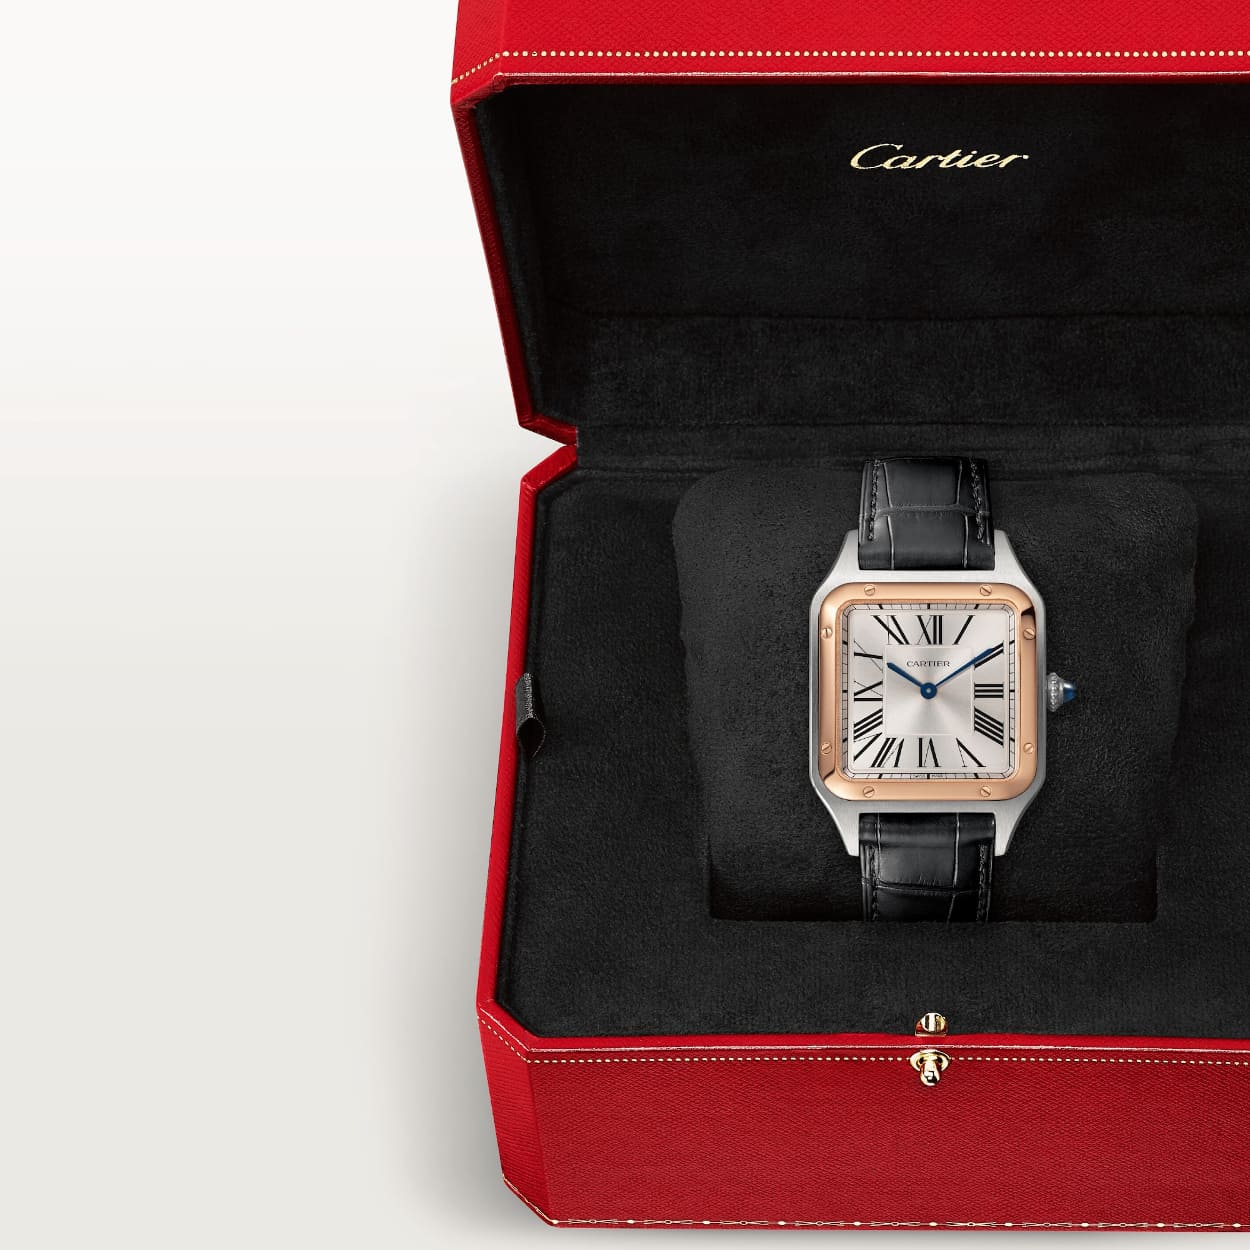 Santos-Dumont Modell W2SA0011 in Cartier Verpackung